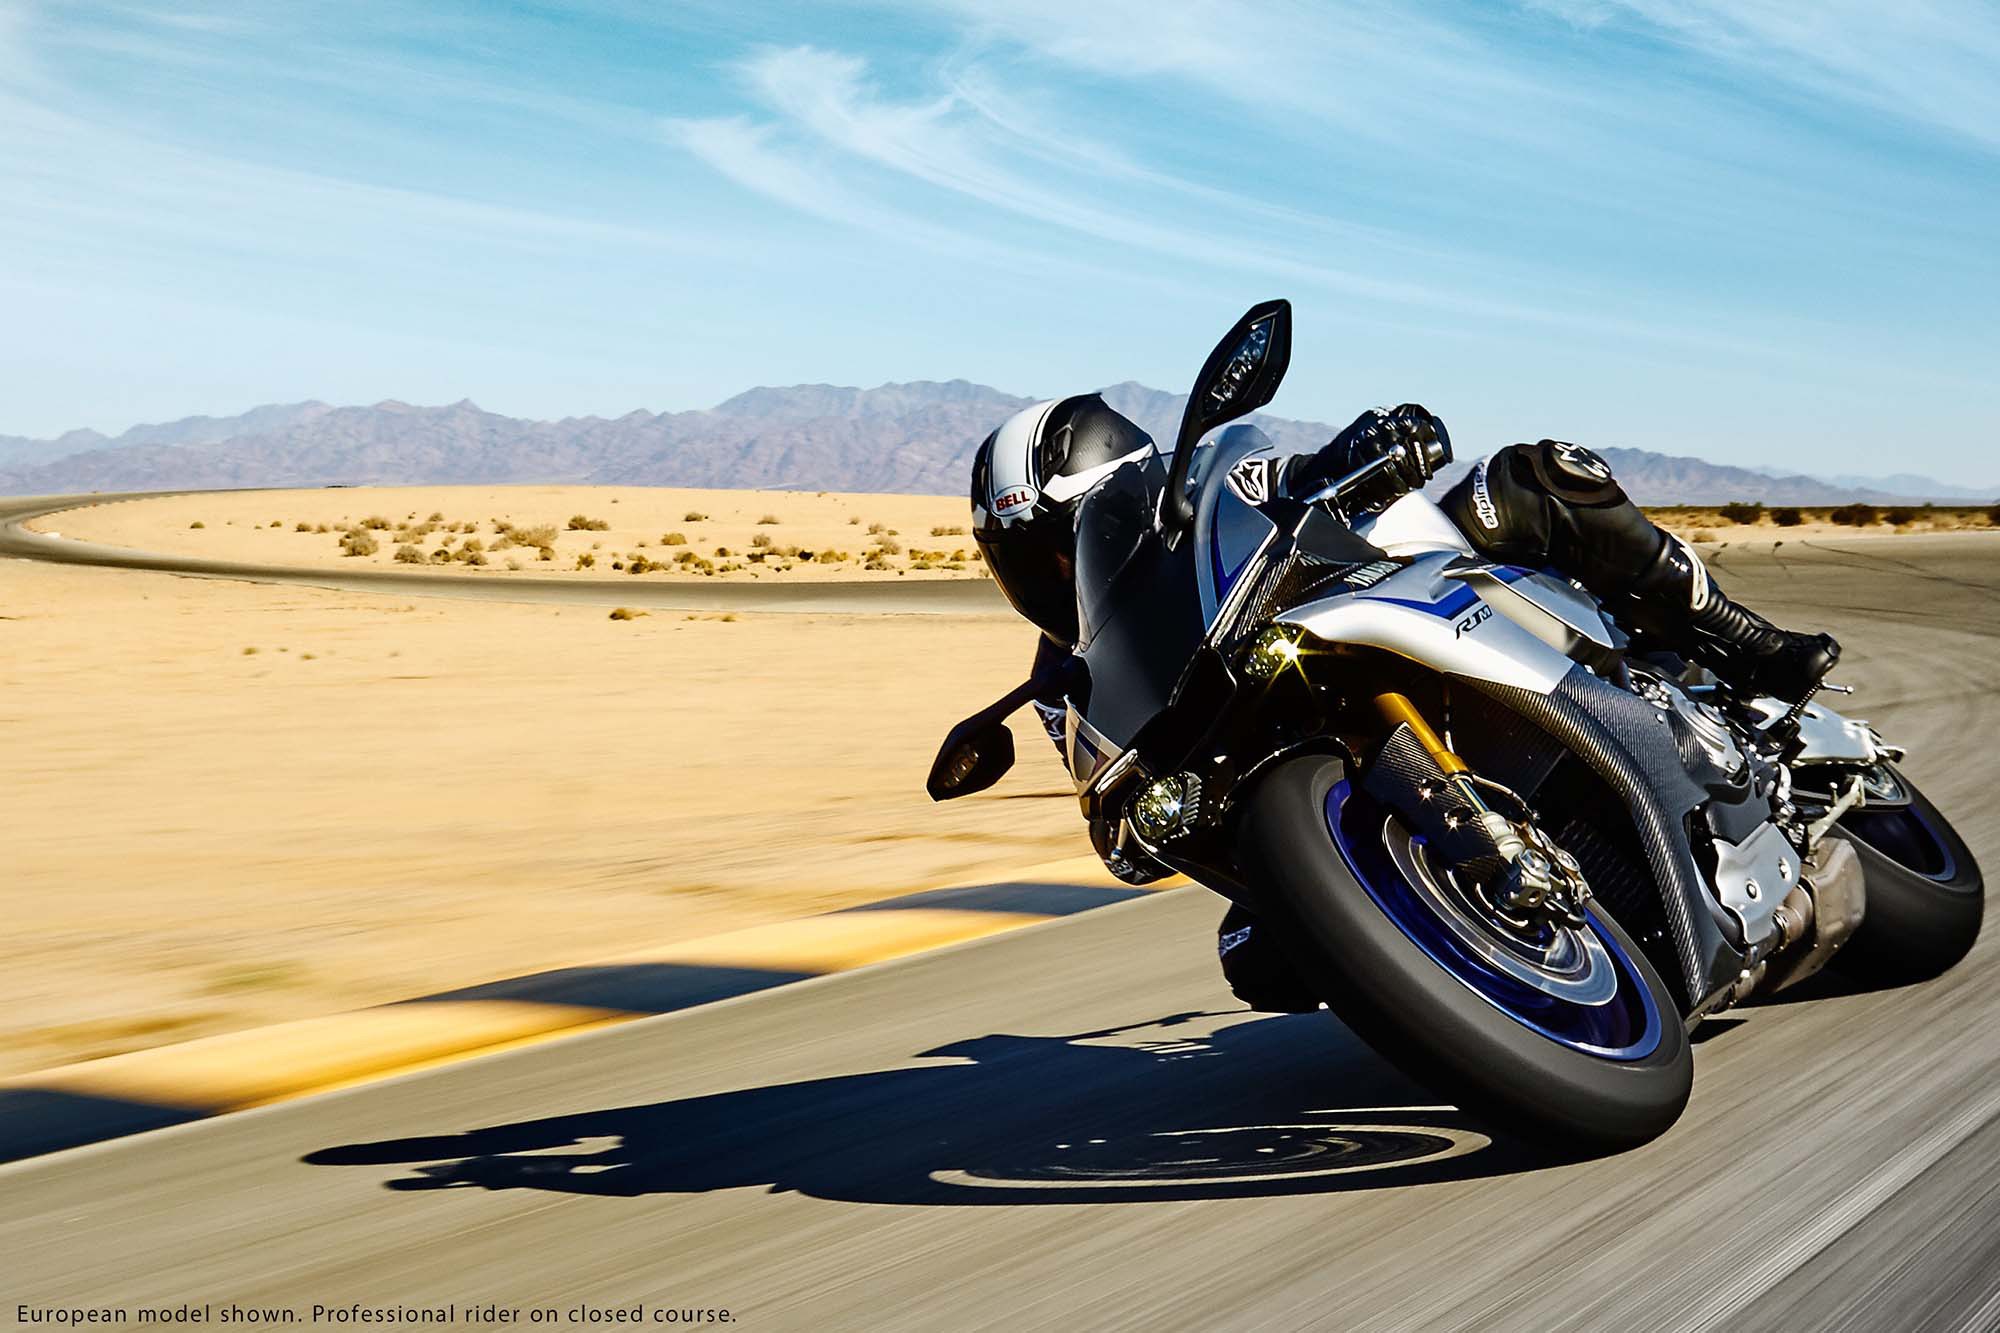 2015 Yamaha R1 and R1M Launched in India at Rs. 22,34,300/- and Rs. 29,43,100/- (all prices ex-showroom, Delhi)